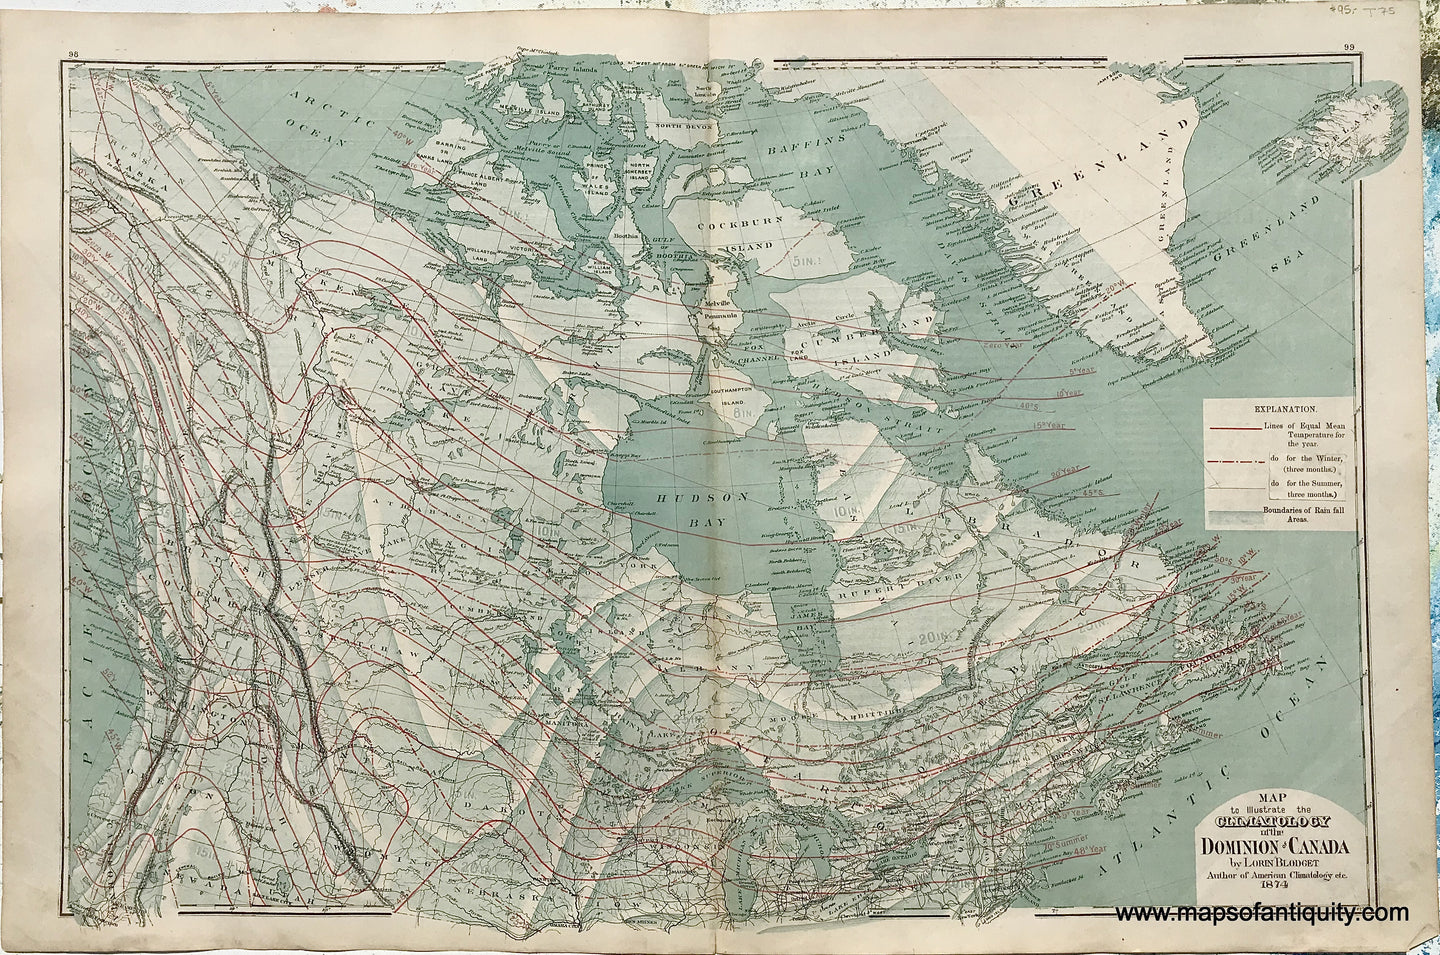 Antique-Map-Map-to-Illustrate-the-Climatology-of-the-Dominion-of-Canada-by-Loren-Blodget-Author-of-American-Climatology-etc.-1874-1875-Walling-/-Tackabury-Canada-Civil-War-1800s-19th-century-Maps-of-Antiquity